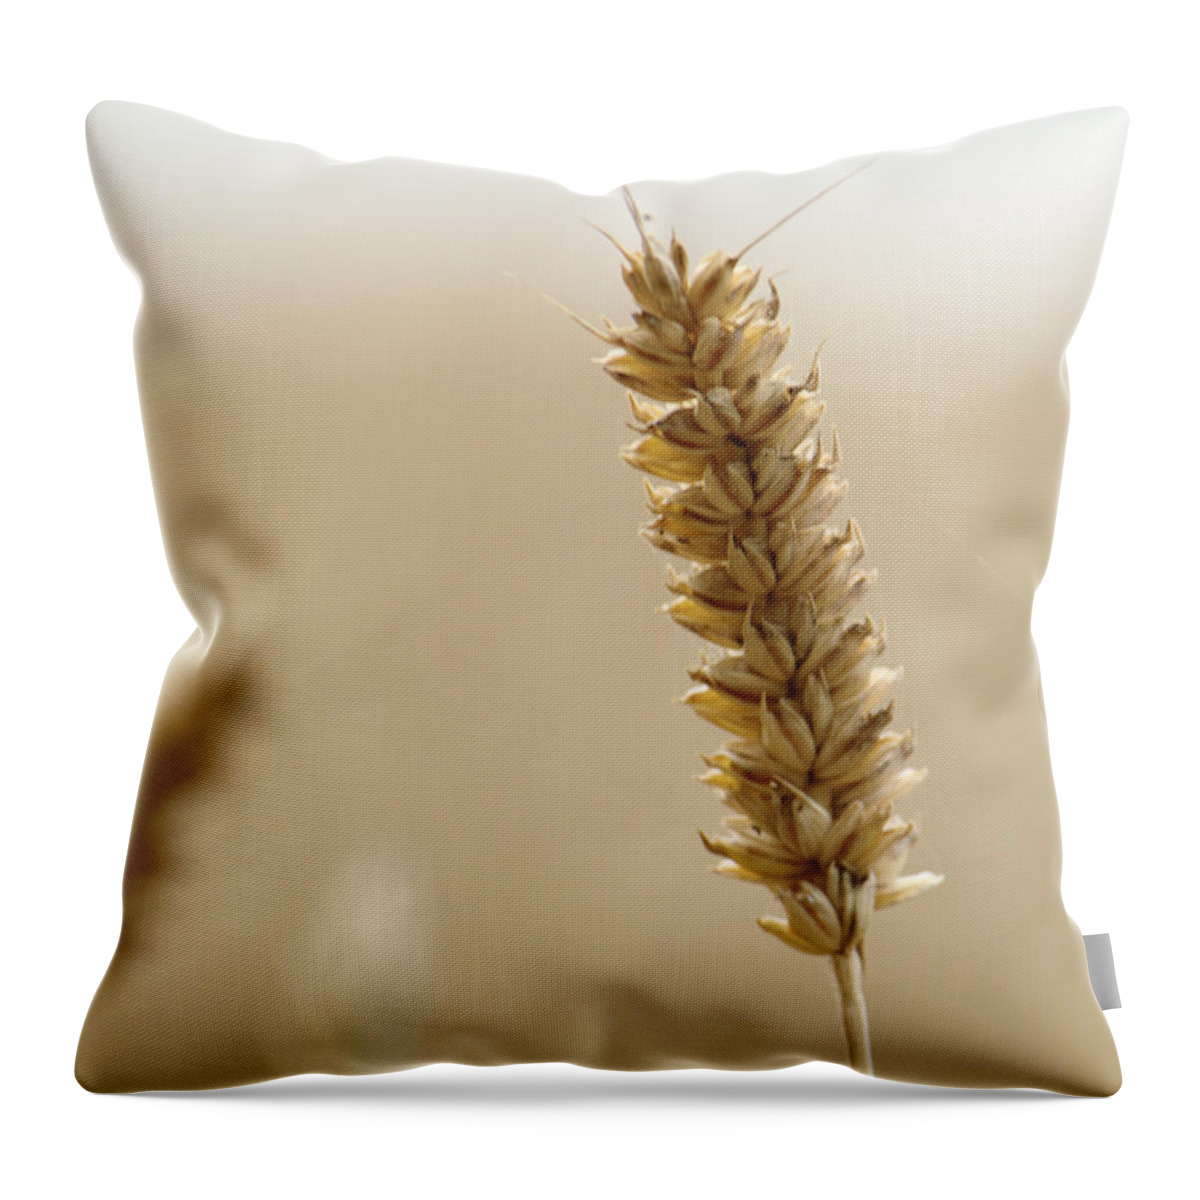 Ear Throw Pillow featuring the photograph Ear Of Wheat by Adrian Wale